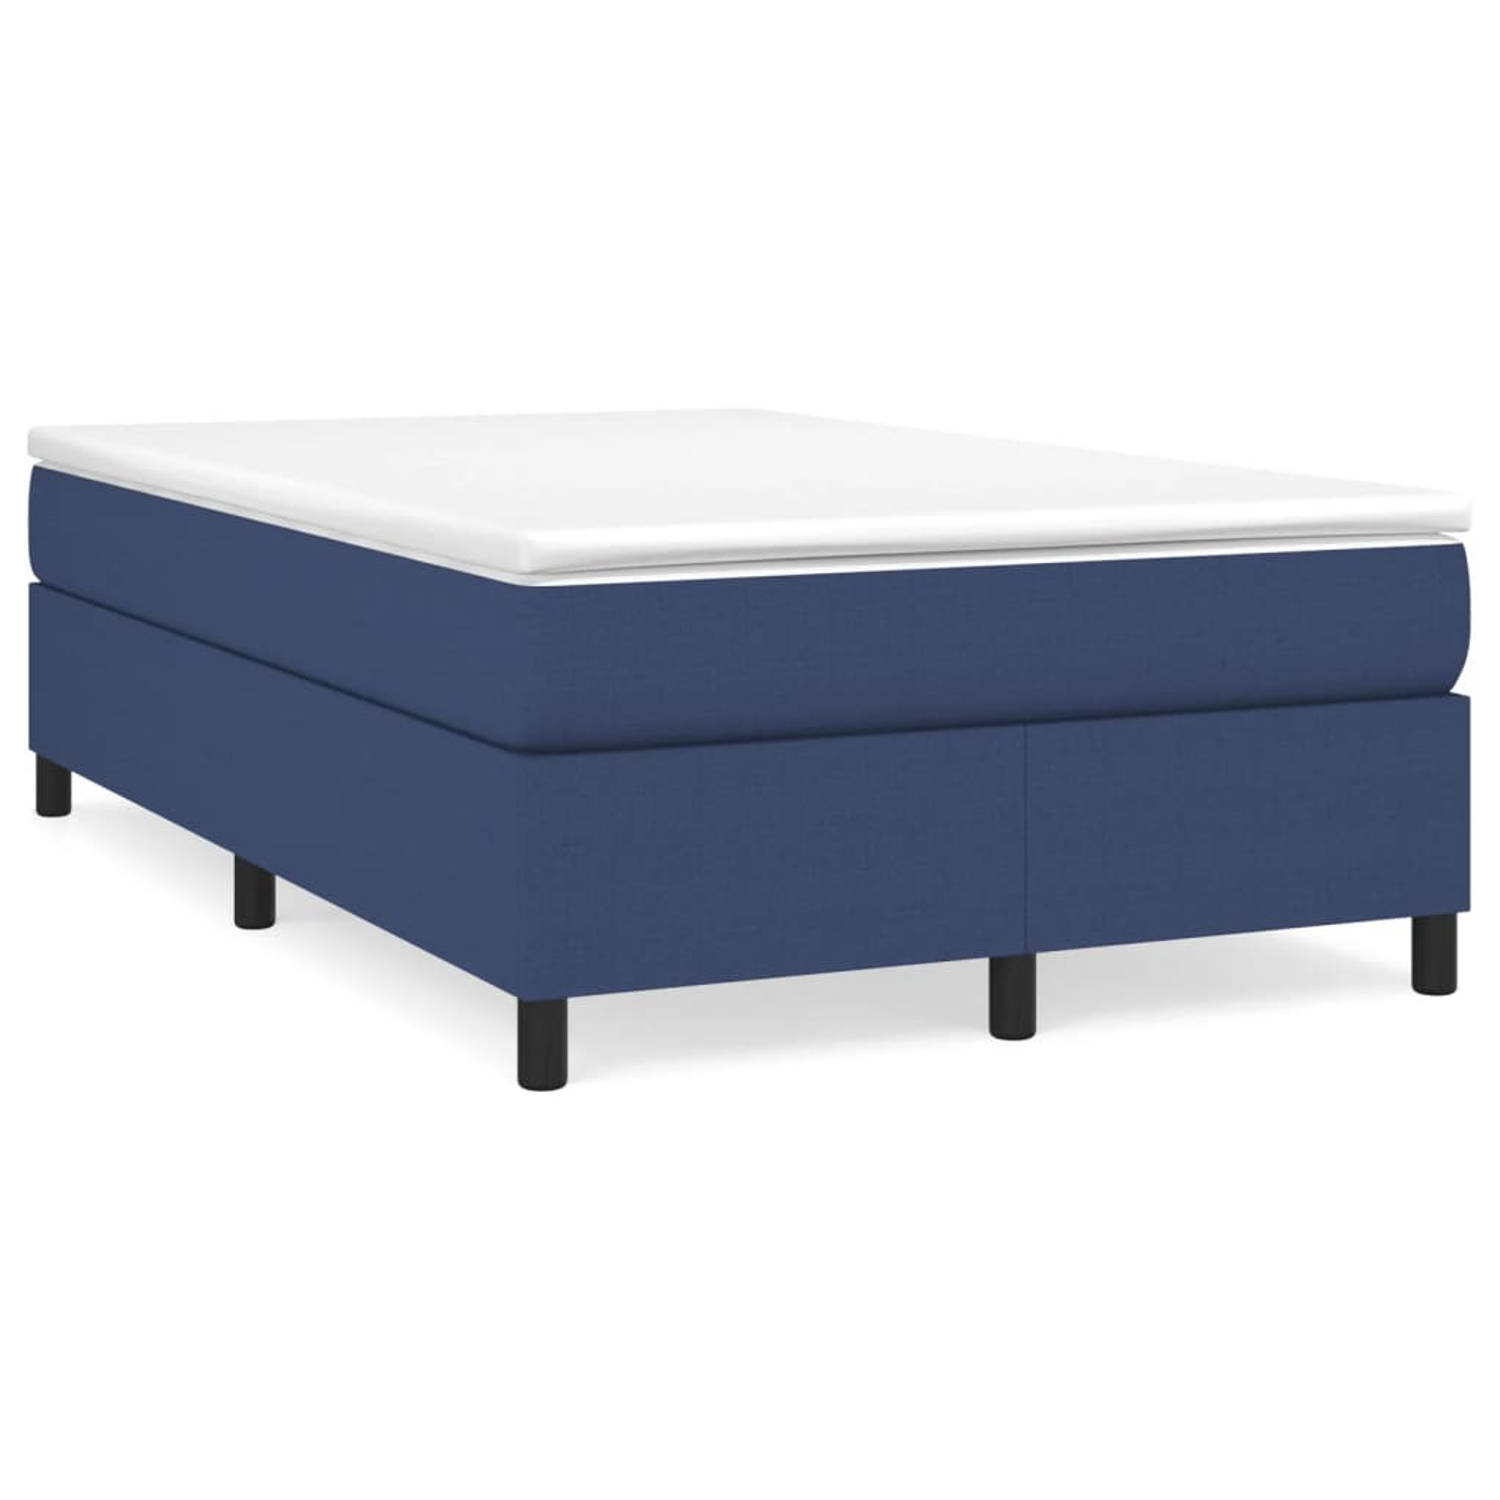 The Living Store Boxspringframe stof blauw 120x200 cm - Boxspringframe - Boxspringframes - Bed - Ledikant - Slaapmeubel - Bedframe - Bedbodem - Tweepersoonsbed - Boxspring - Bedden